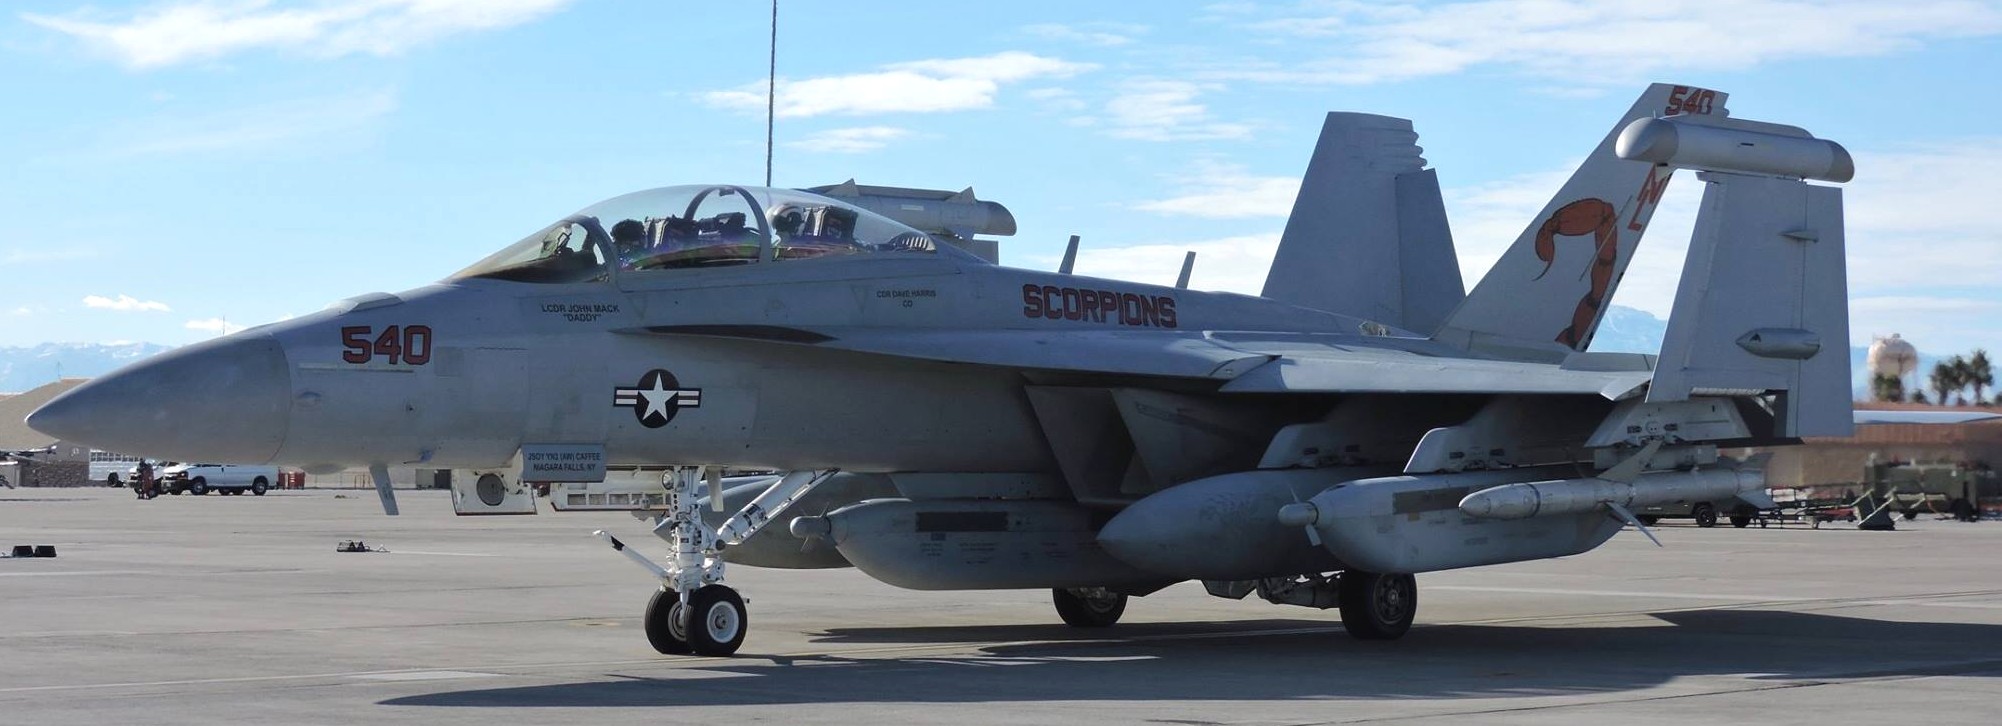 vaq-132 scorpions electronic attack squadron vaqron us navy boeing ea-18g growler exercise red flag nellis afb nevada 26